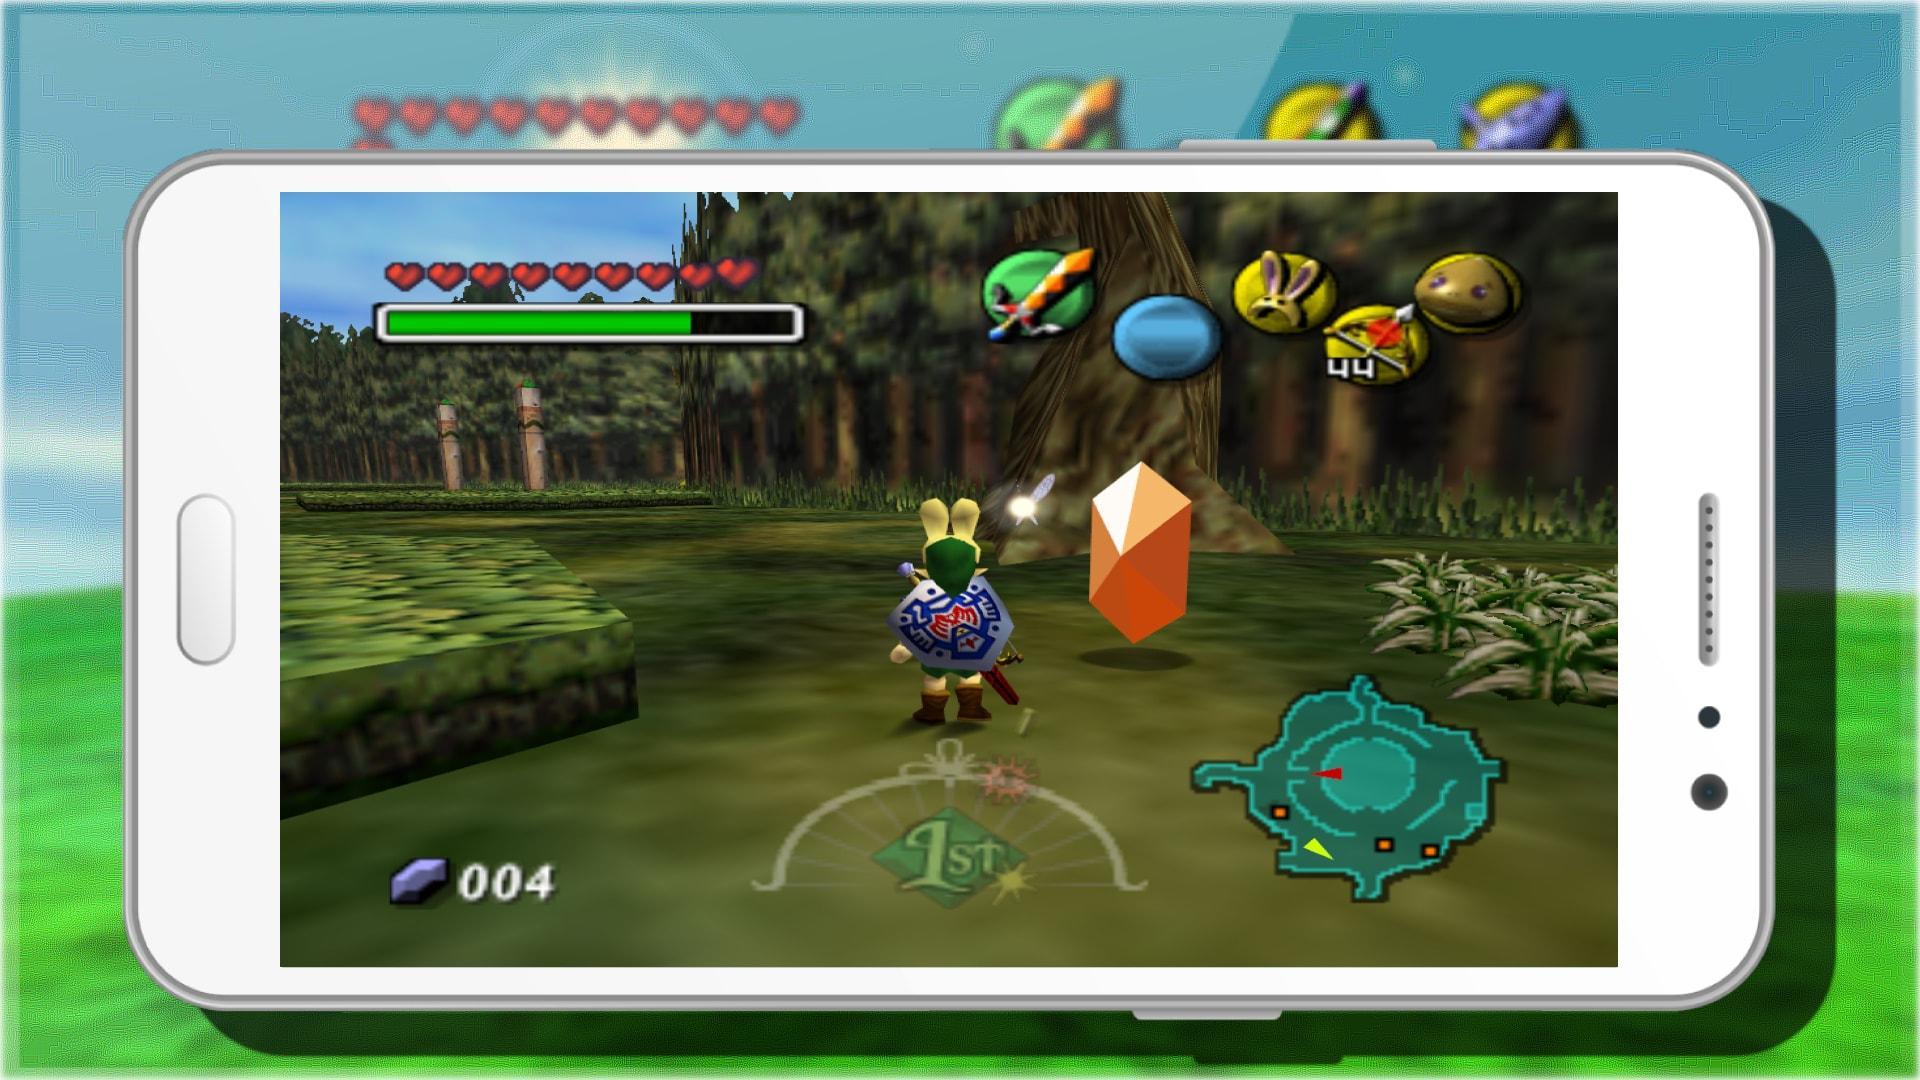 The Legend of Zelda: Ocarina of Time - Android Gameplay